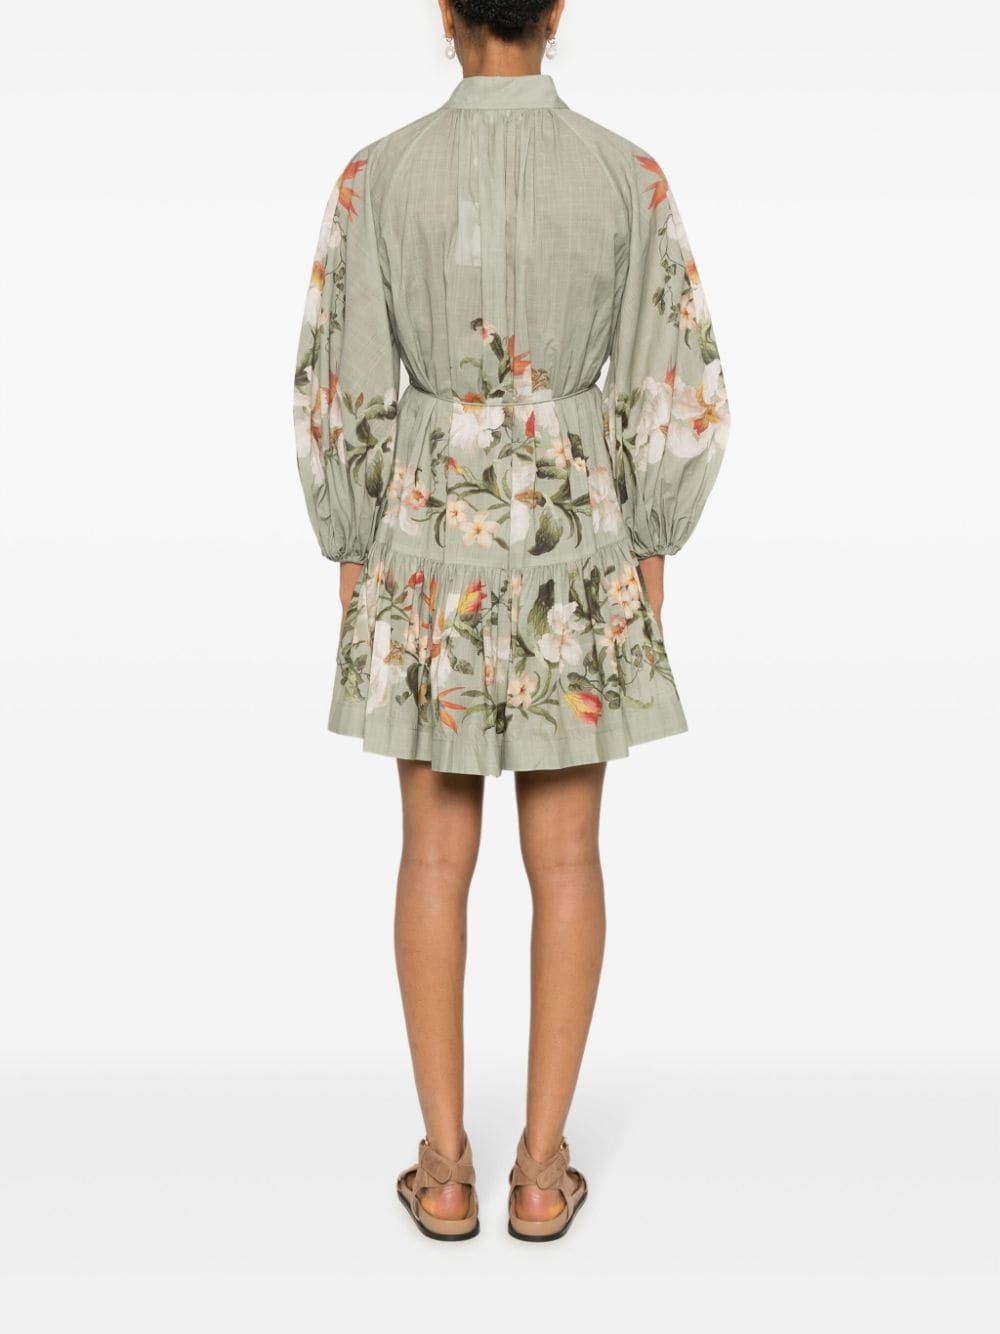 ZIMMERMANN SAGEPALM Mini Dress with Floral Print for Women - SS24 Collection